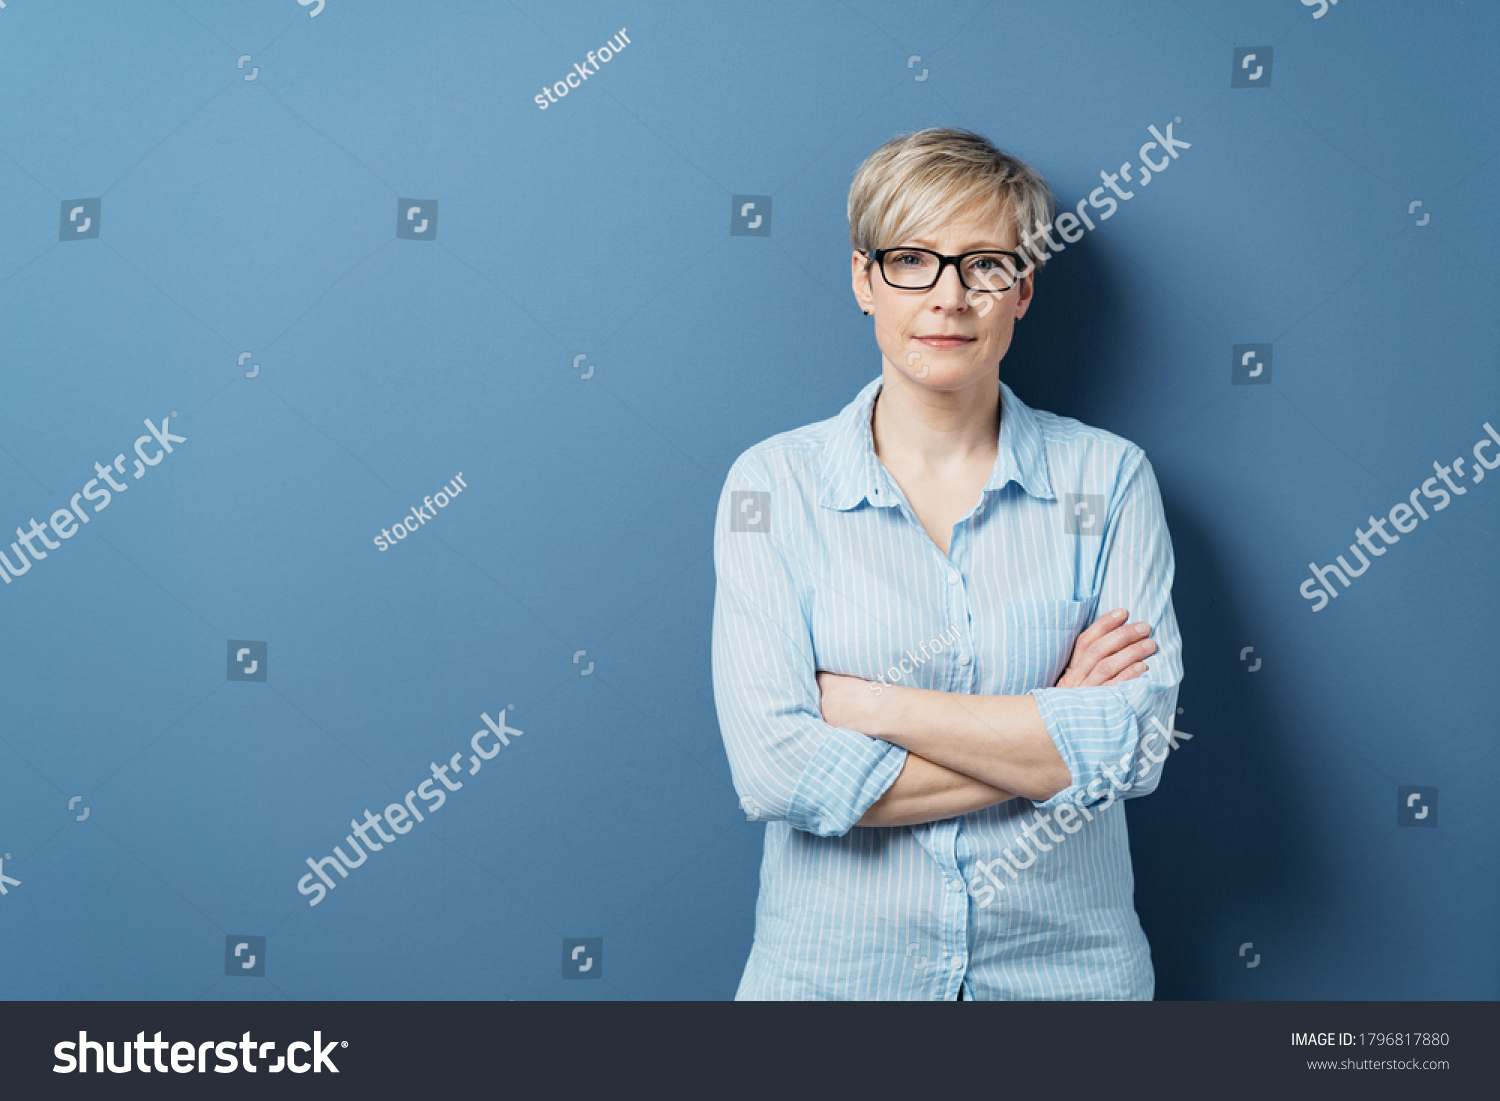 Portrait of mature blonde woman wearing glasses standing against blue background with arms crossed #1796817880